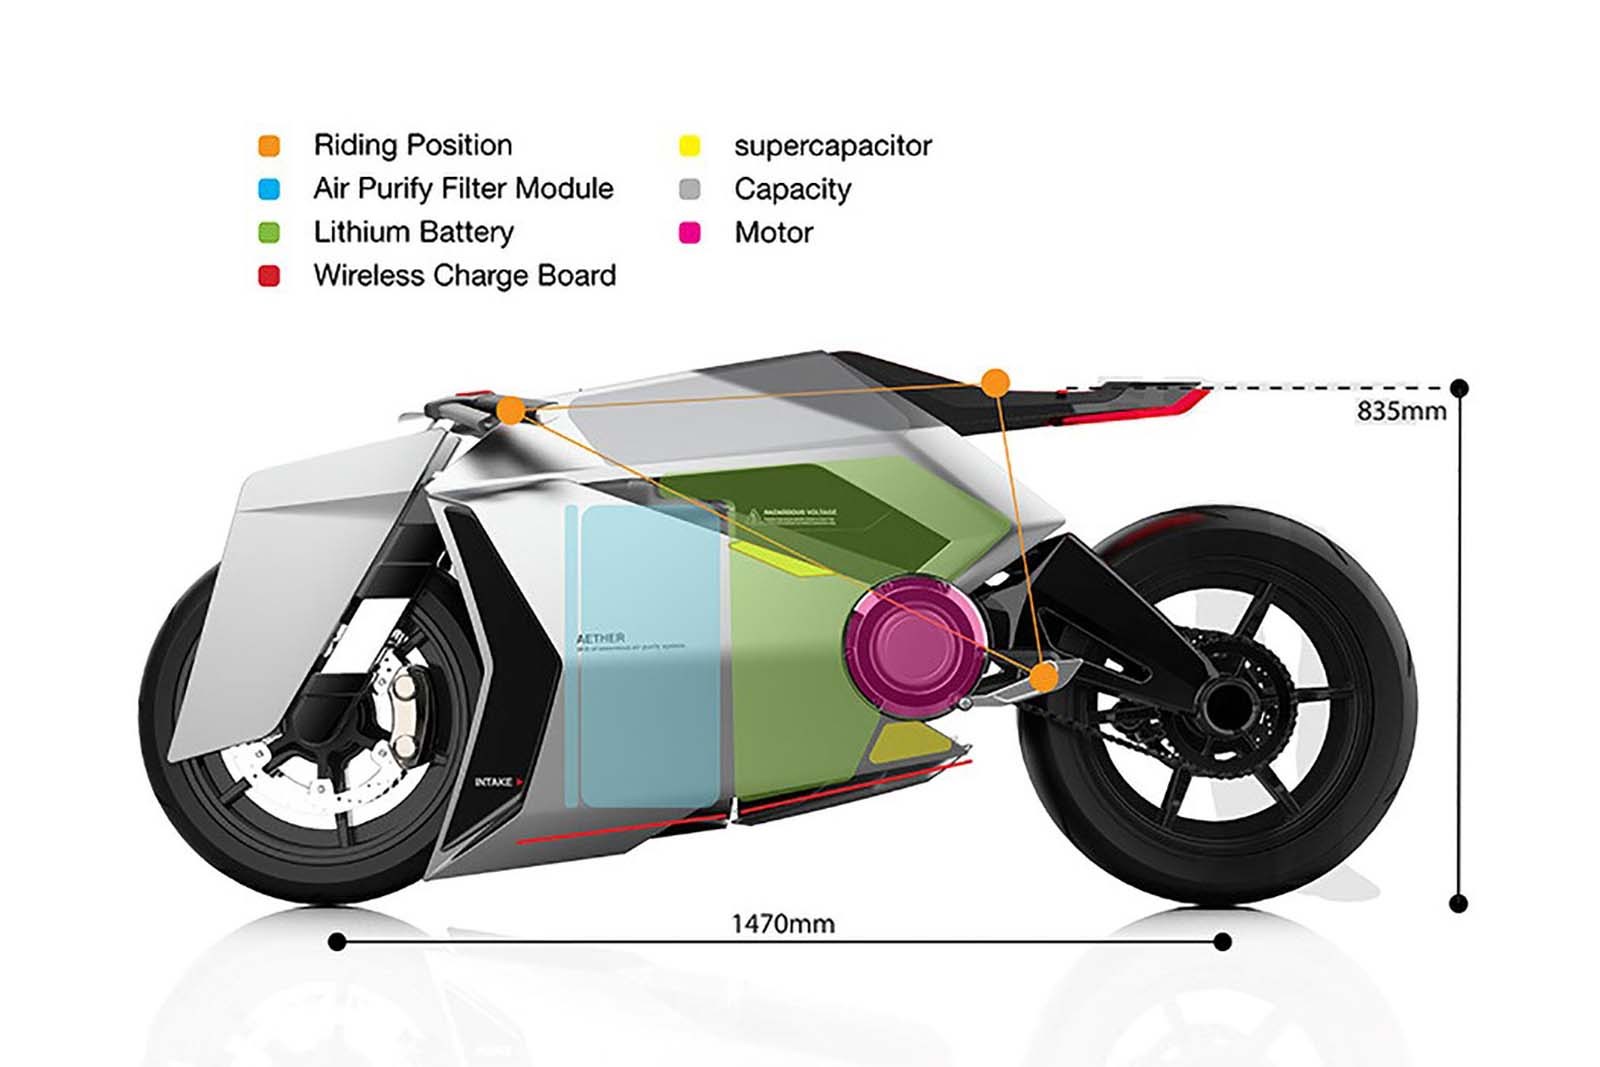 Aether-electric-motorcycle-concept-07.jpg